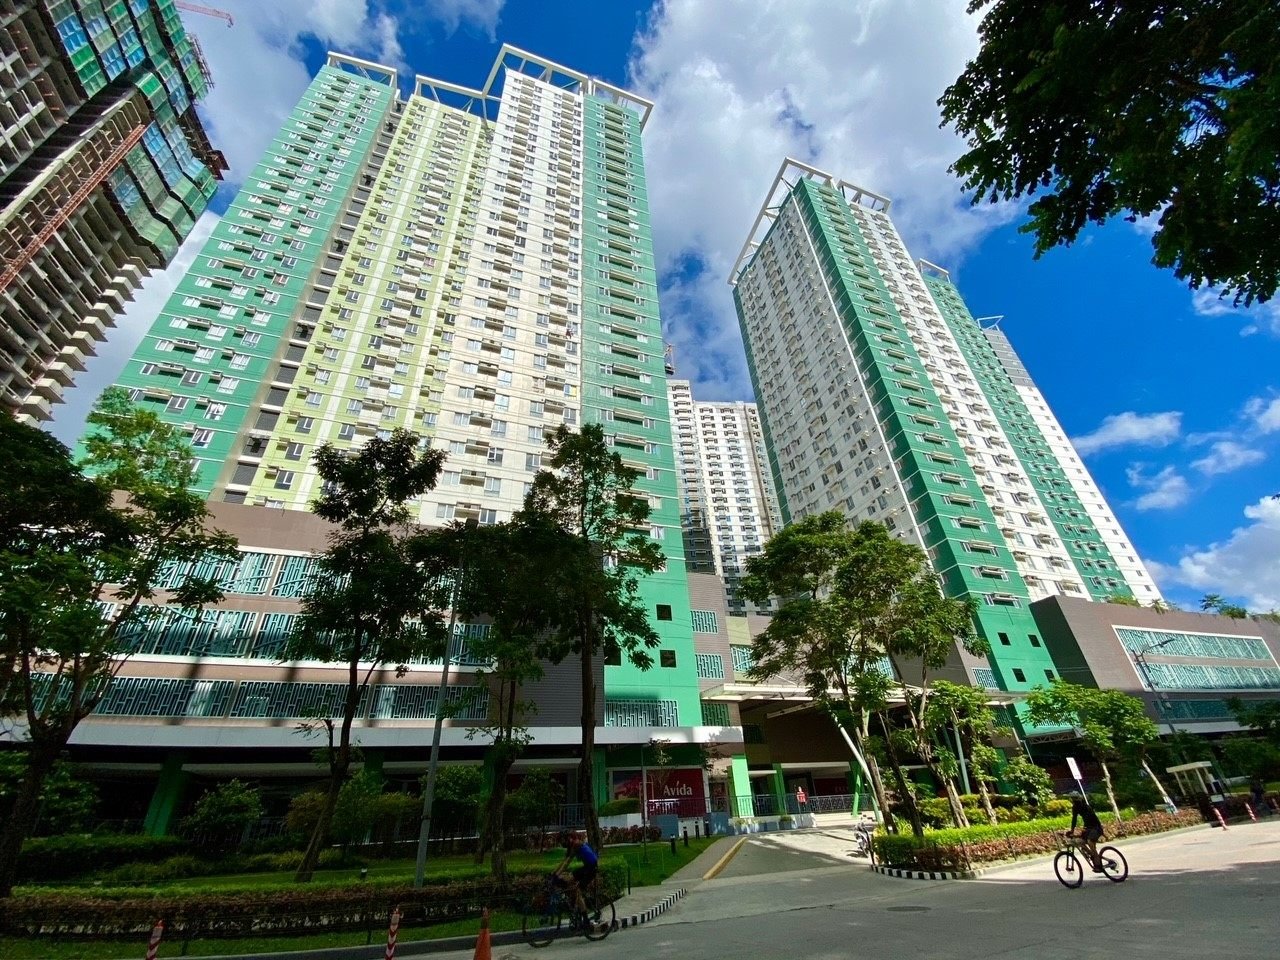 Yau and his wife  bought  a unit at the Avida Towers Riala in Cebu. Photo: Company